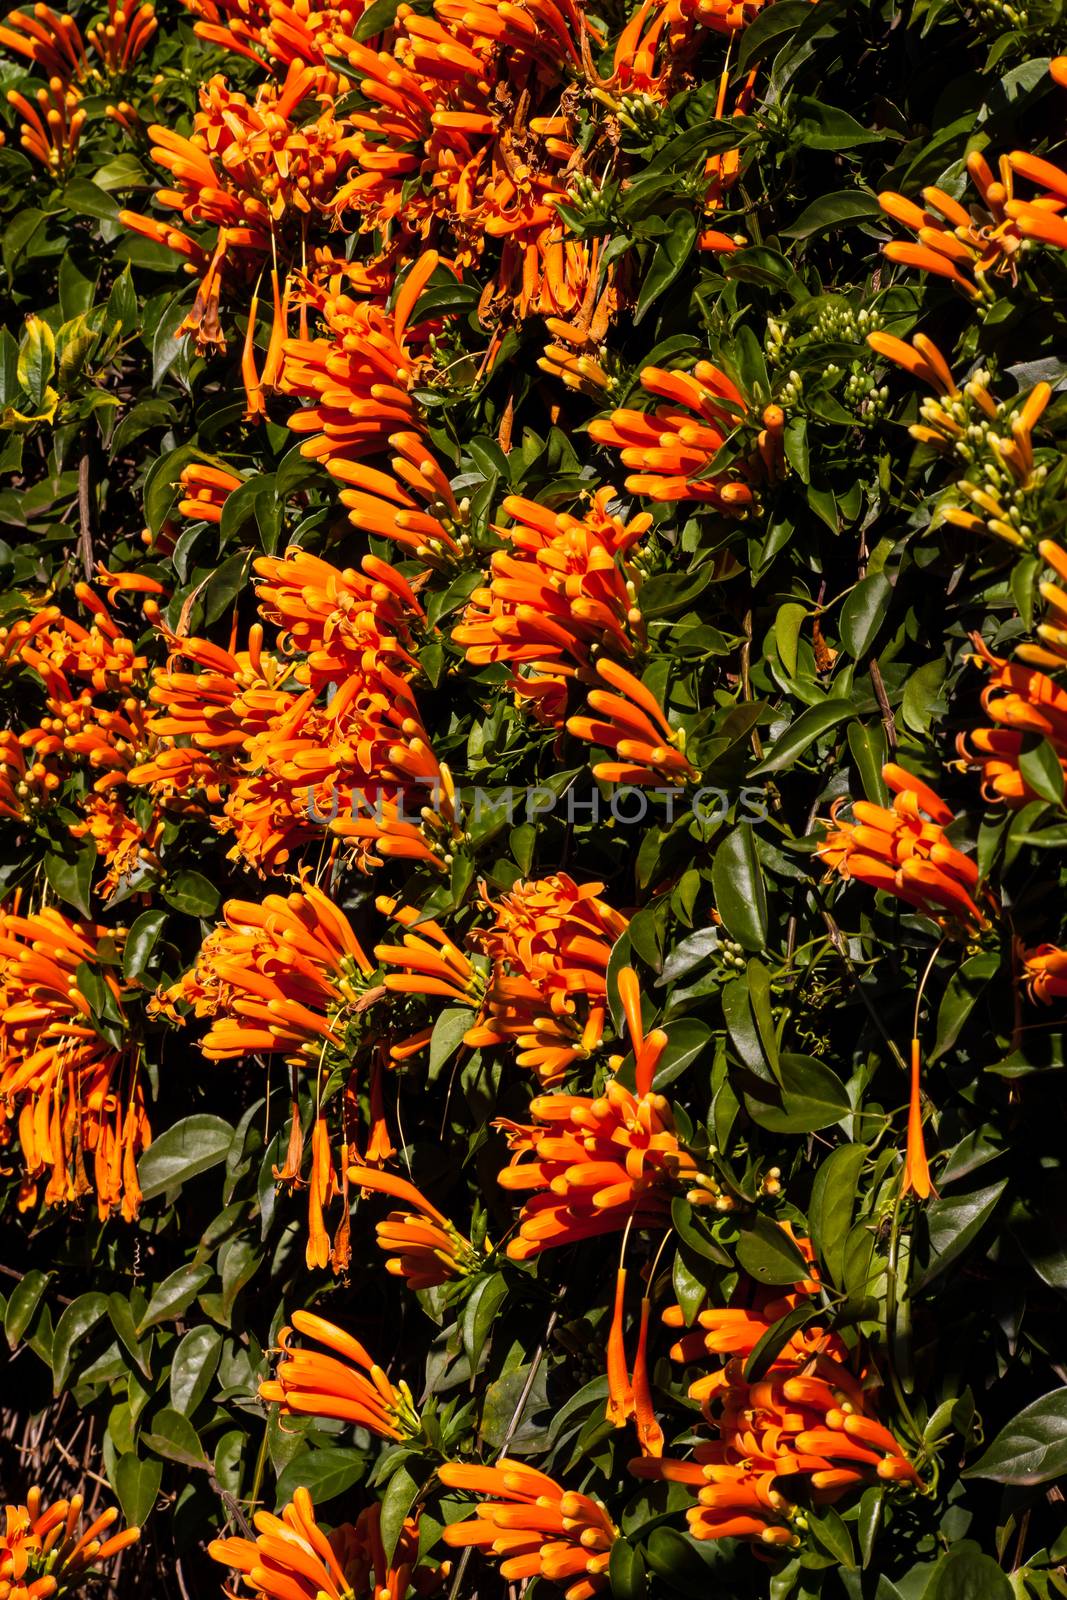 A wall of bright orange flowers 2 by kobus_peche